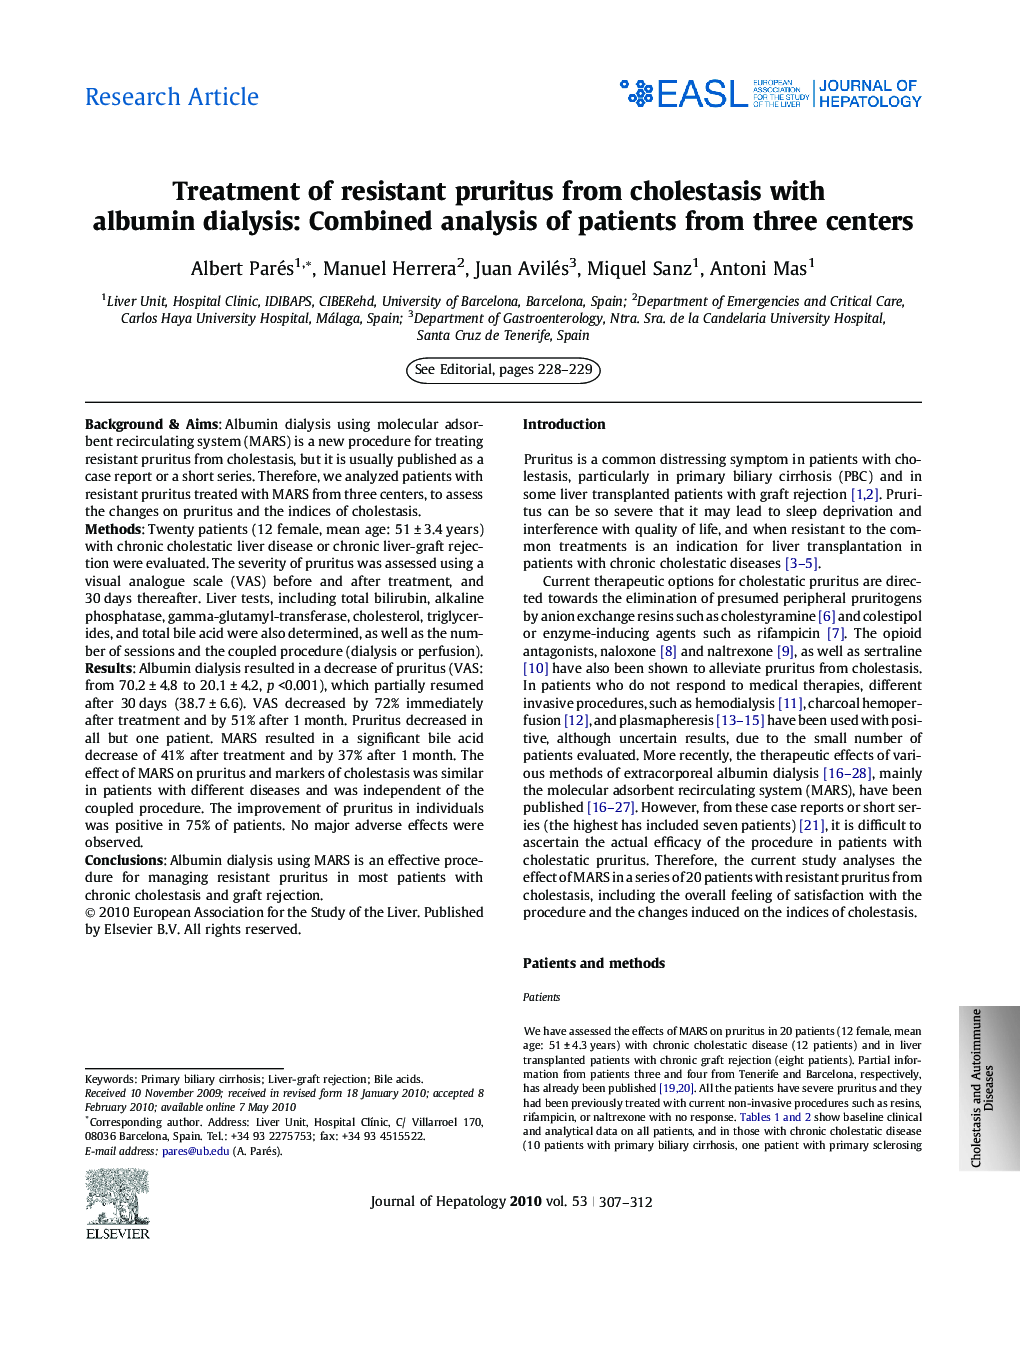 Research ArticleTreatment of resistant pruritus from cholestasis with albumin dialysis: Combined analysis of patients from three centers